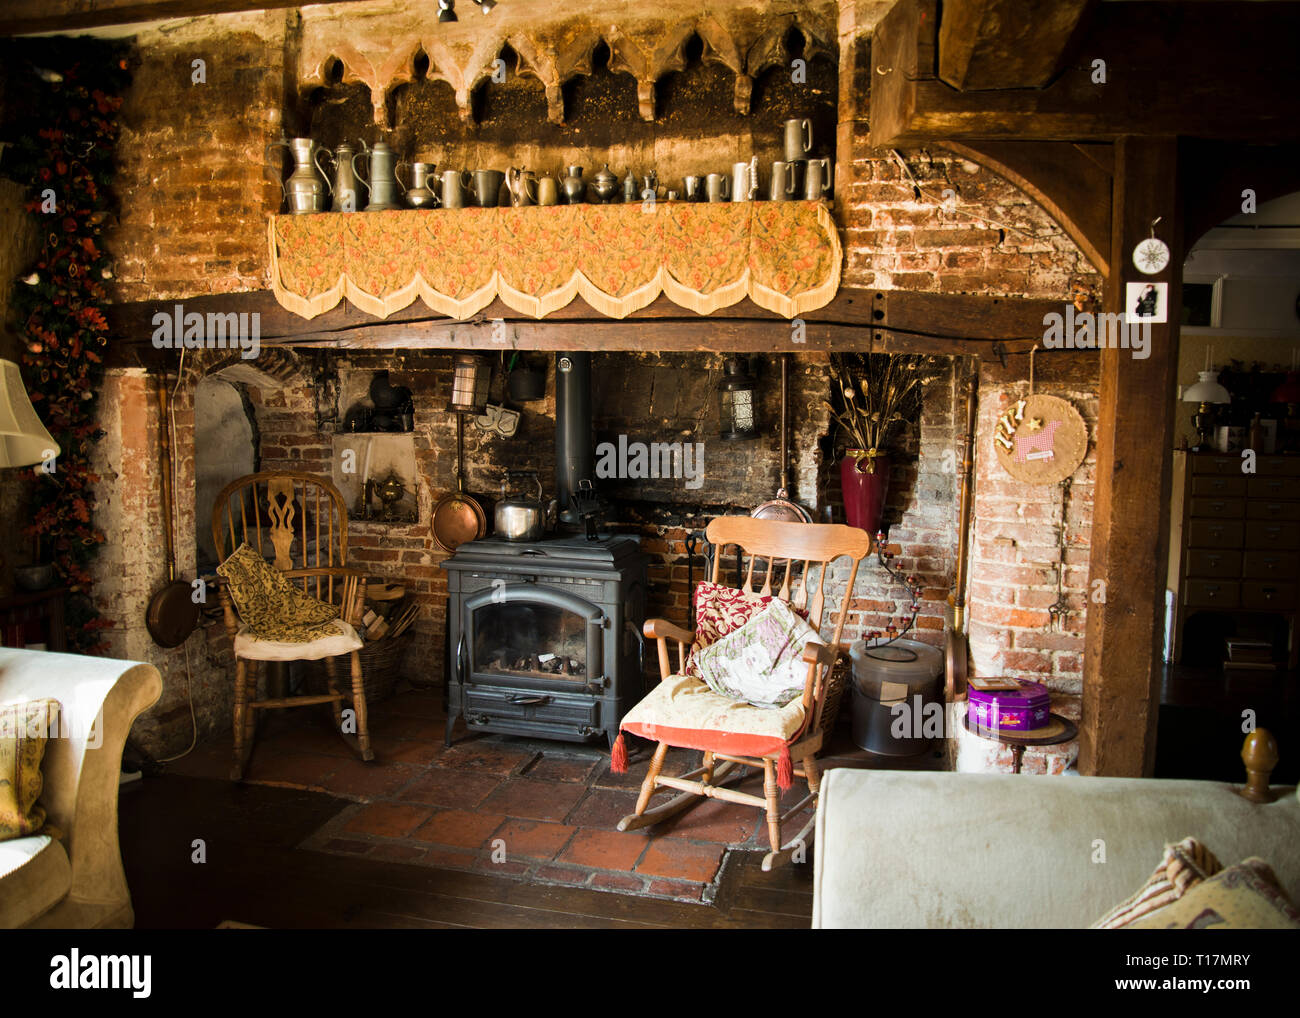 Old fireplace in the drawing room of an old country village home surrounded with decorative antique furniture and interesting objects hanging on walls Stock Photo